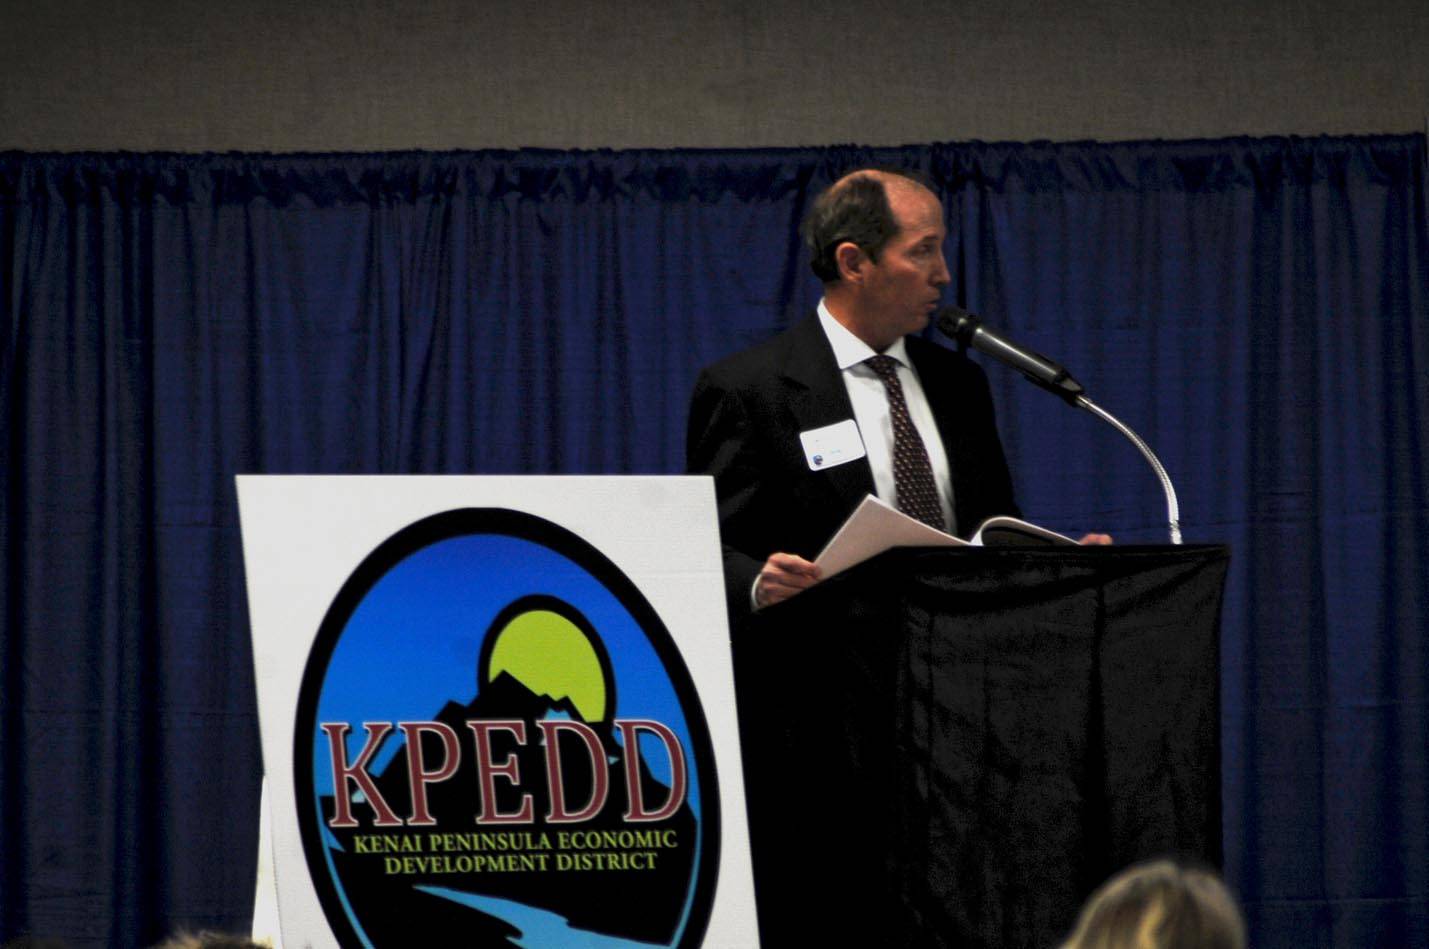 Mike Navarre, commissioner of the Alaska Department of Commerce, Community and Economic Development, speaks about the need for a stable fiscal plan for the state to the attendees at the Kenai Peninsula Economic Development District’s Industry Outlook Forum on Wednesday, Jan. 10, 2018 in Soldotna, Alaska. (Photo by Elizabeth Earl/Peninsula Clarion)